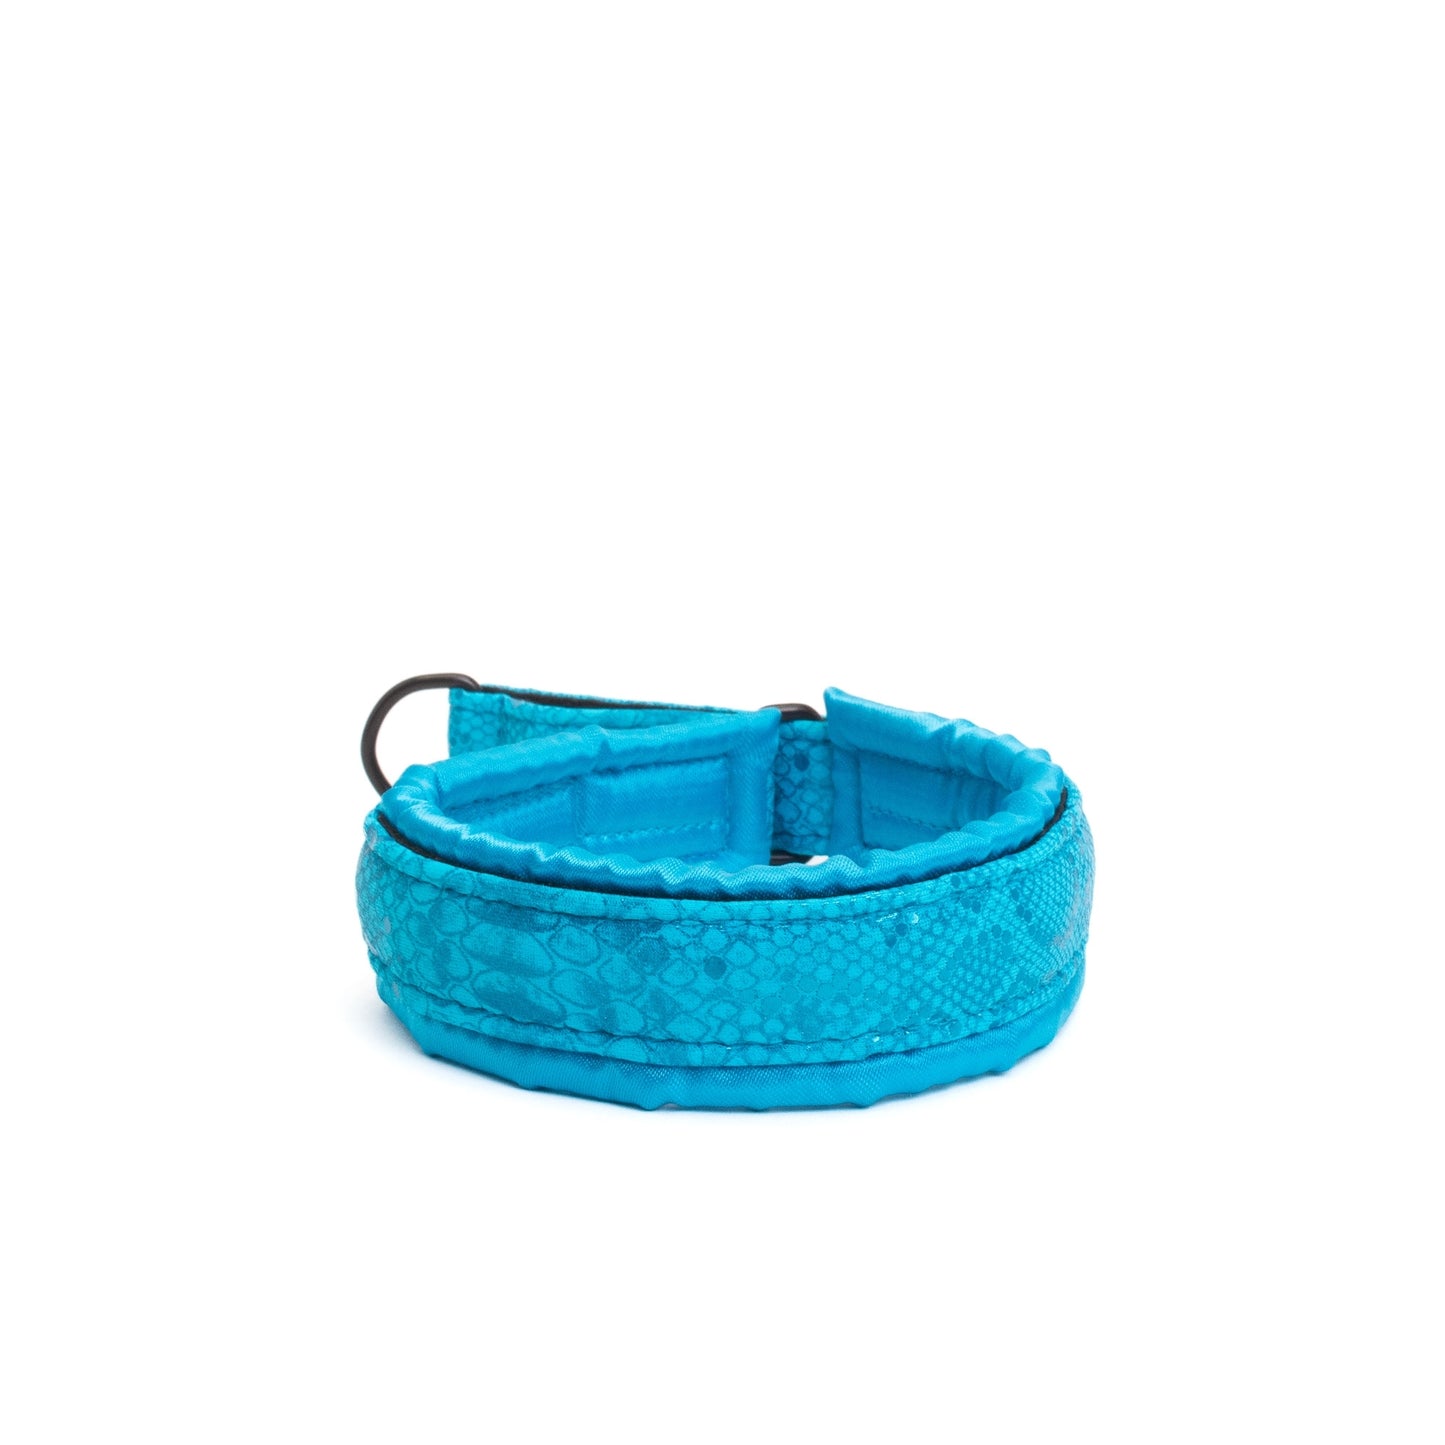 Small / Medium Martingale Collar Poodle Supply Turquoise Snake